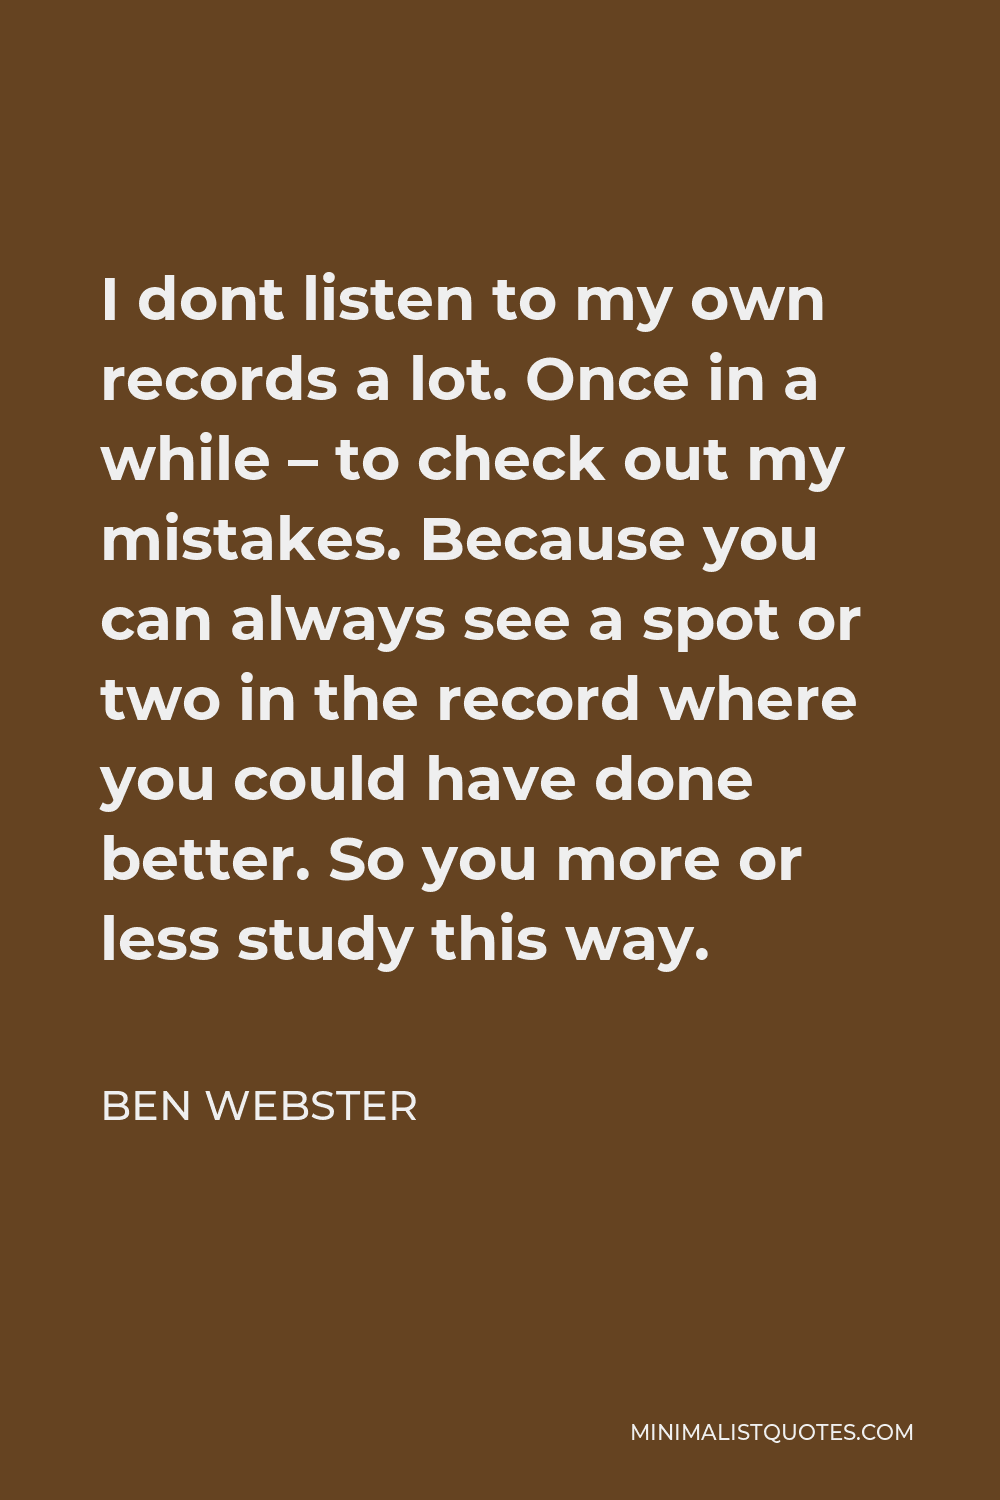 Ben Webster Quote - I dont listen to my own records a lot. Once in a while – to check out my mistakes. Because you can always see a spot or two in the record where you could have done better. So you more or less study this way.